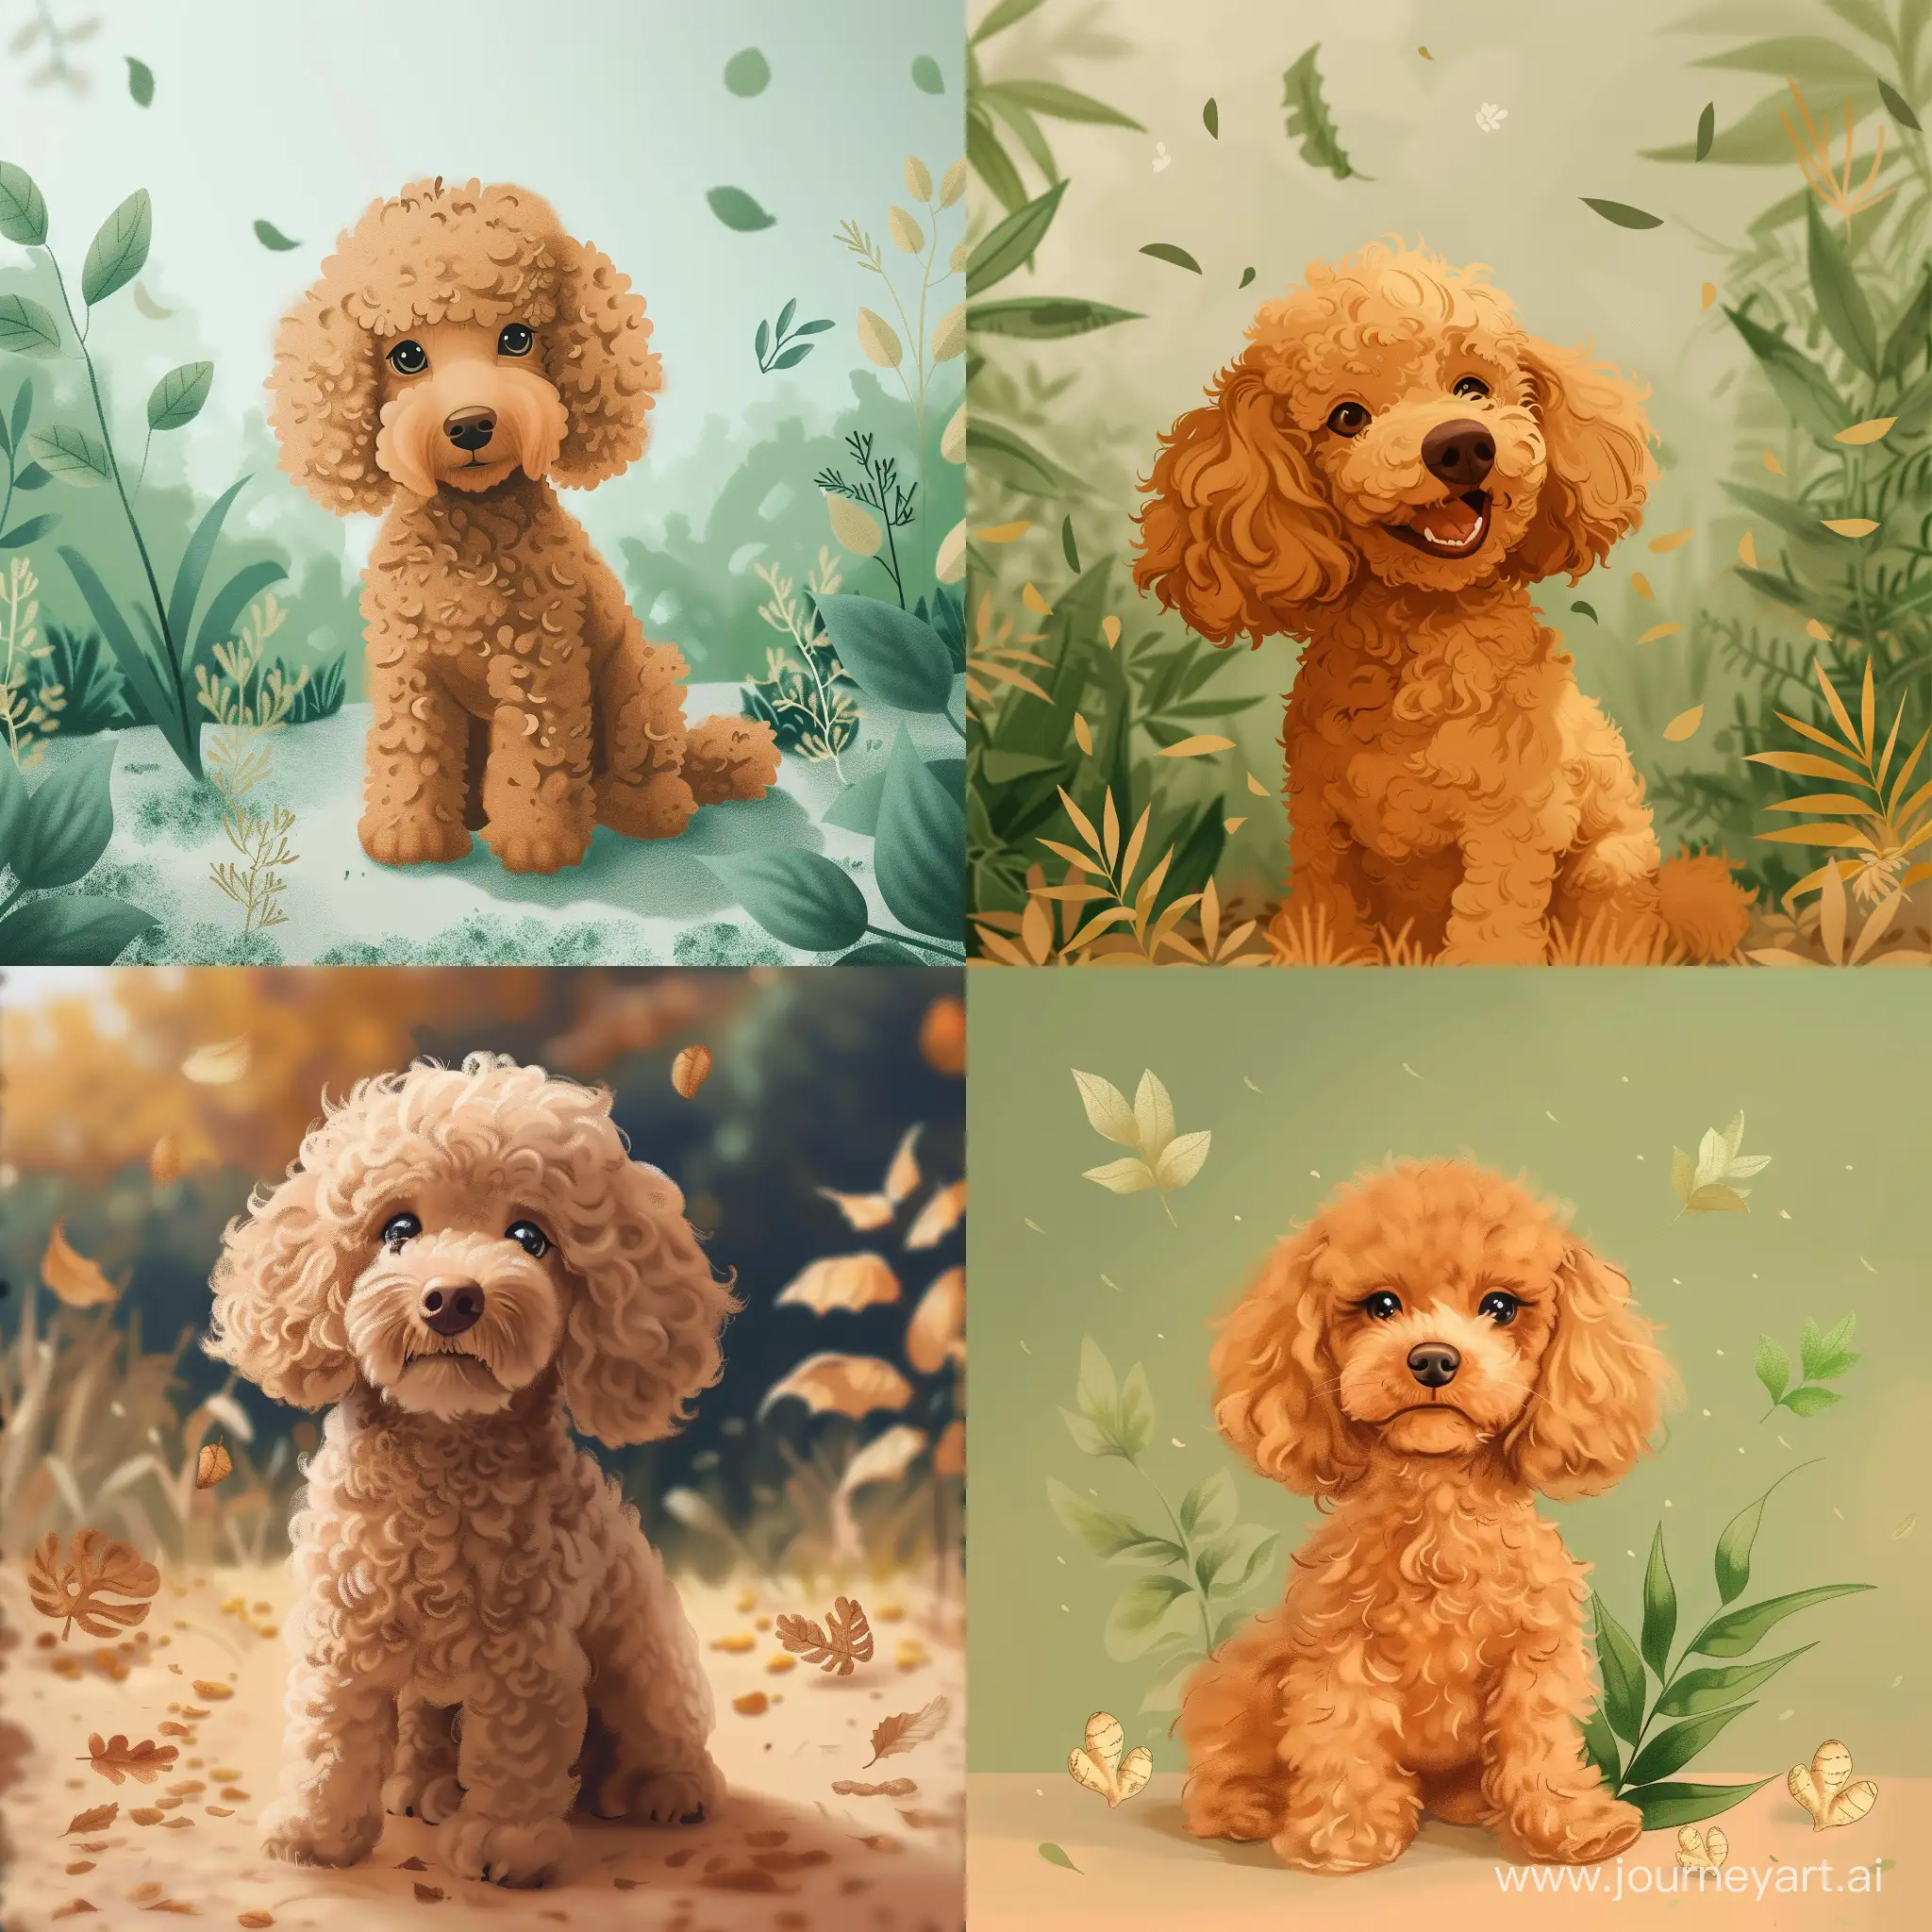 Generate a profile picture for instagram of animated mini poodle standard color named Ginger. Make his sweet and add also small animated gingers and leaves on the background. Everything should be animated